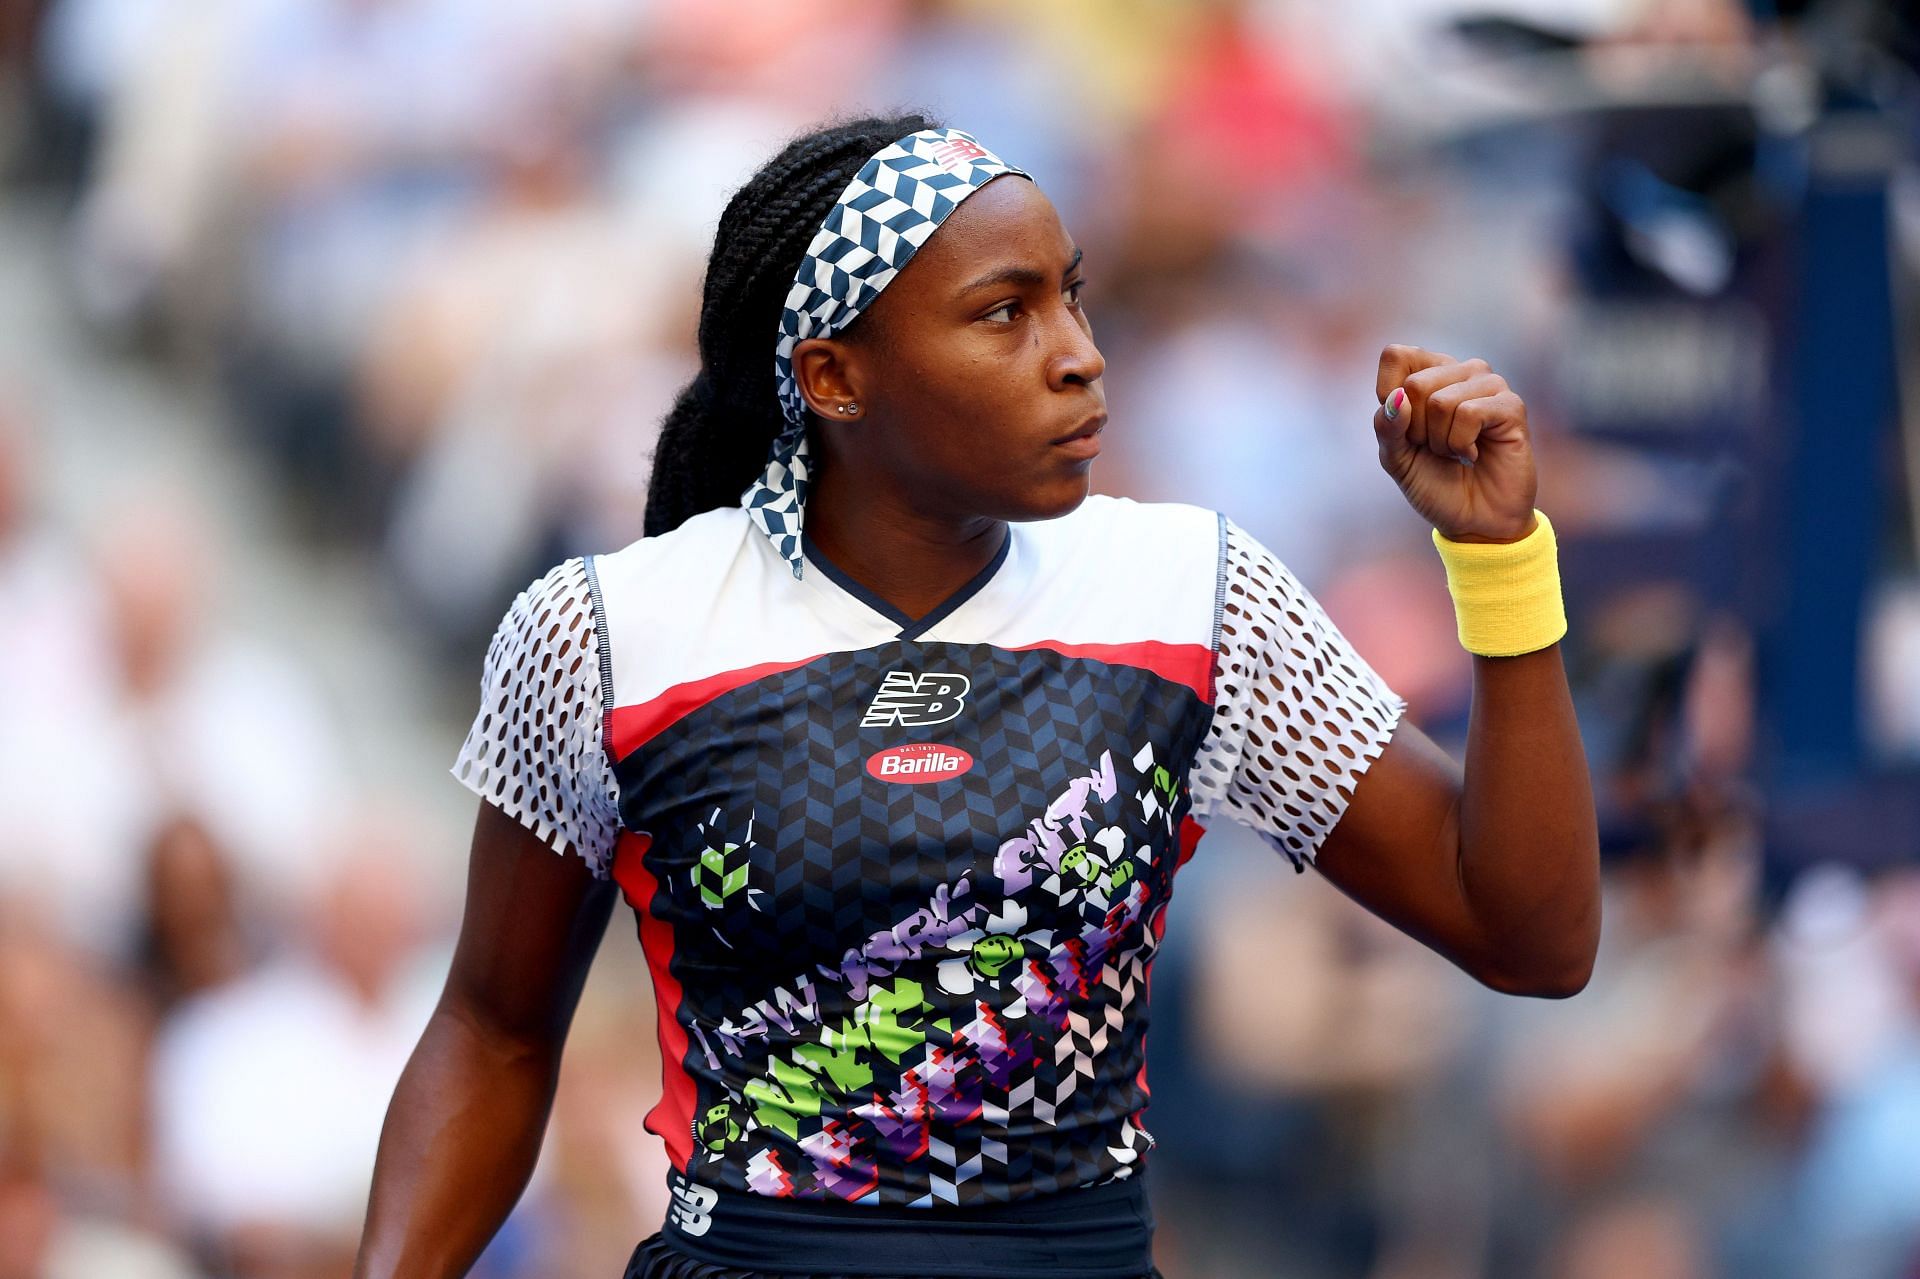 Coco Gauff in action at the 2022 US Open